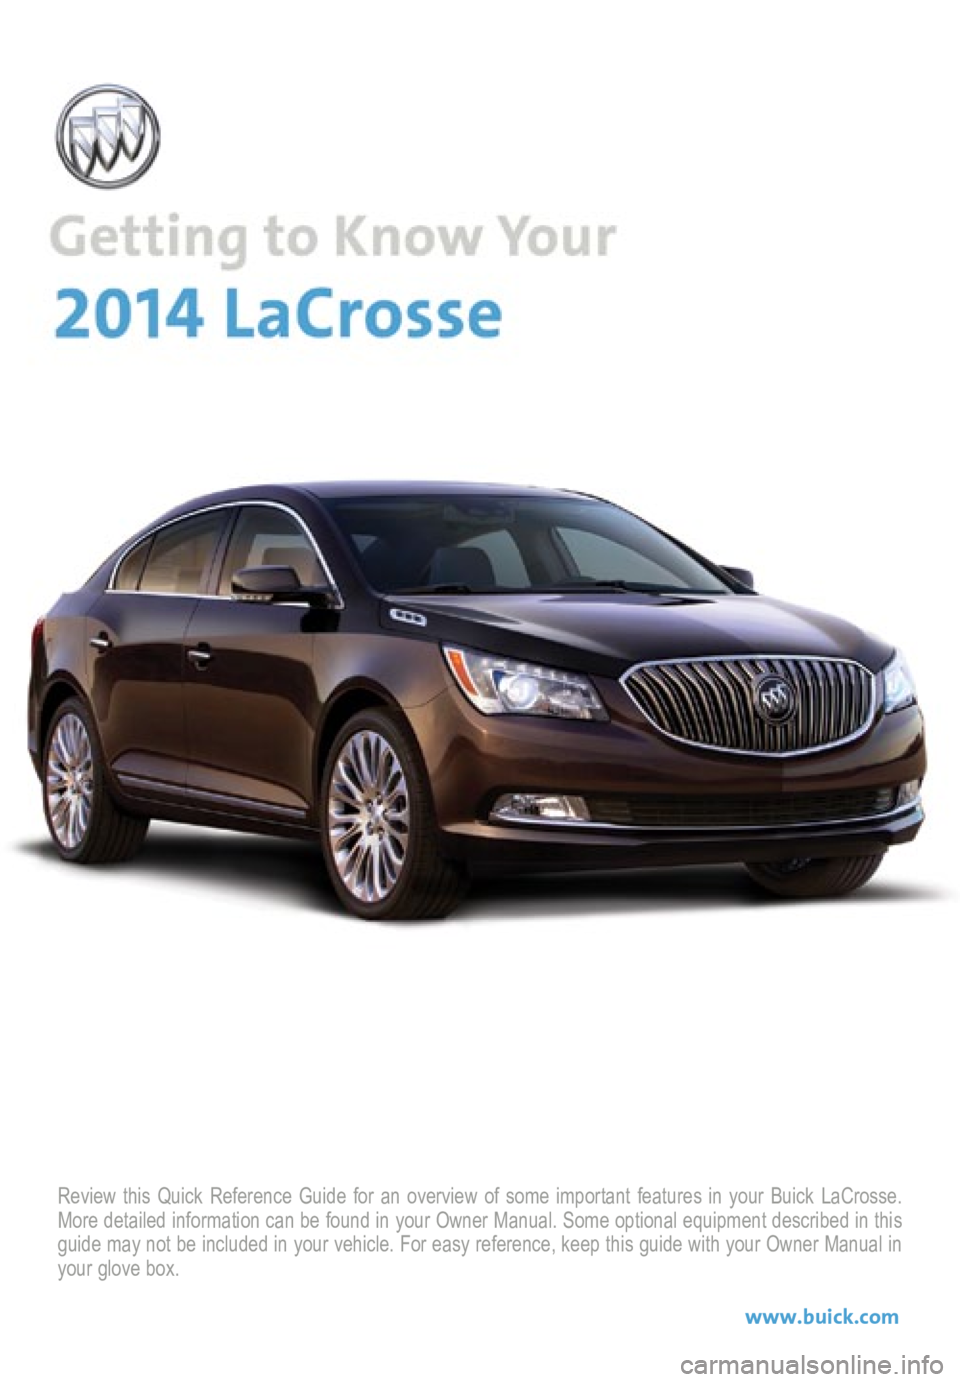 BUICK LACROSSE 2014  Get To Know Guide Review this Quick Reference Guide for an overview of some important feat\
ures in your Buick LaCrosse. 
More detailed information can be found in your Owner Manual. Some option\
al equipment described